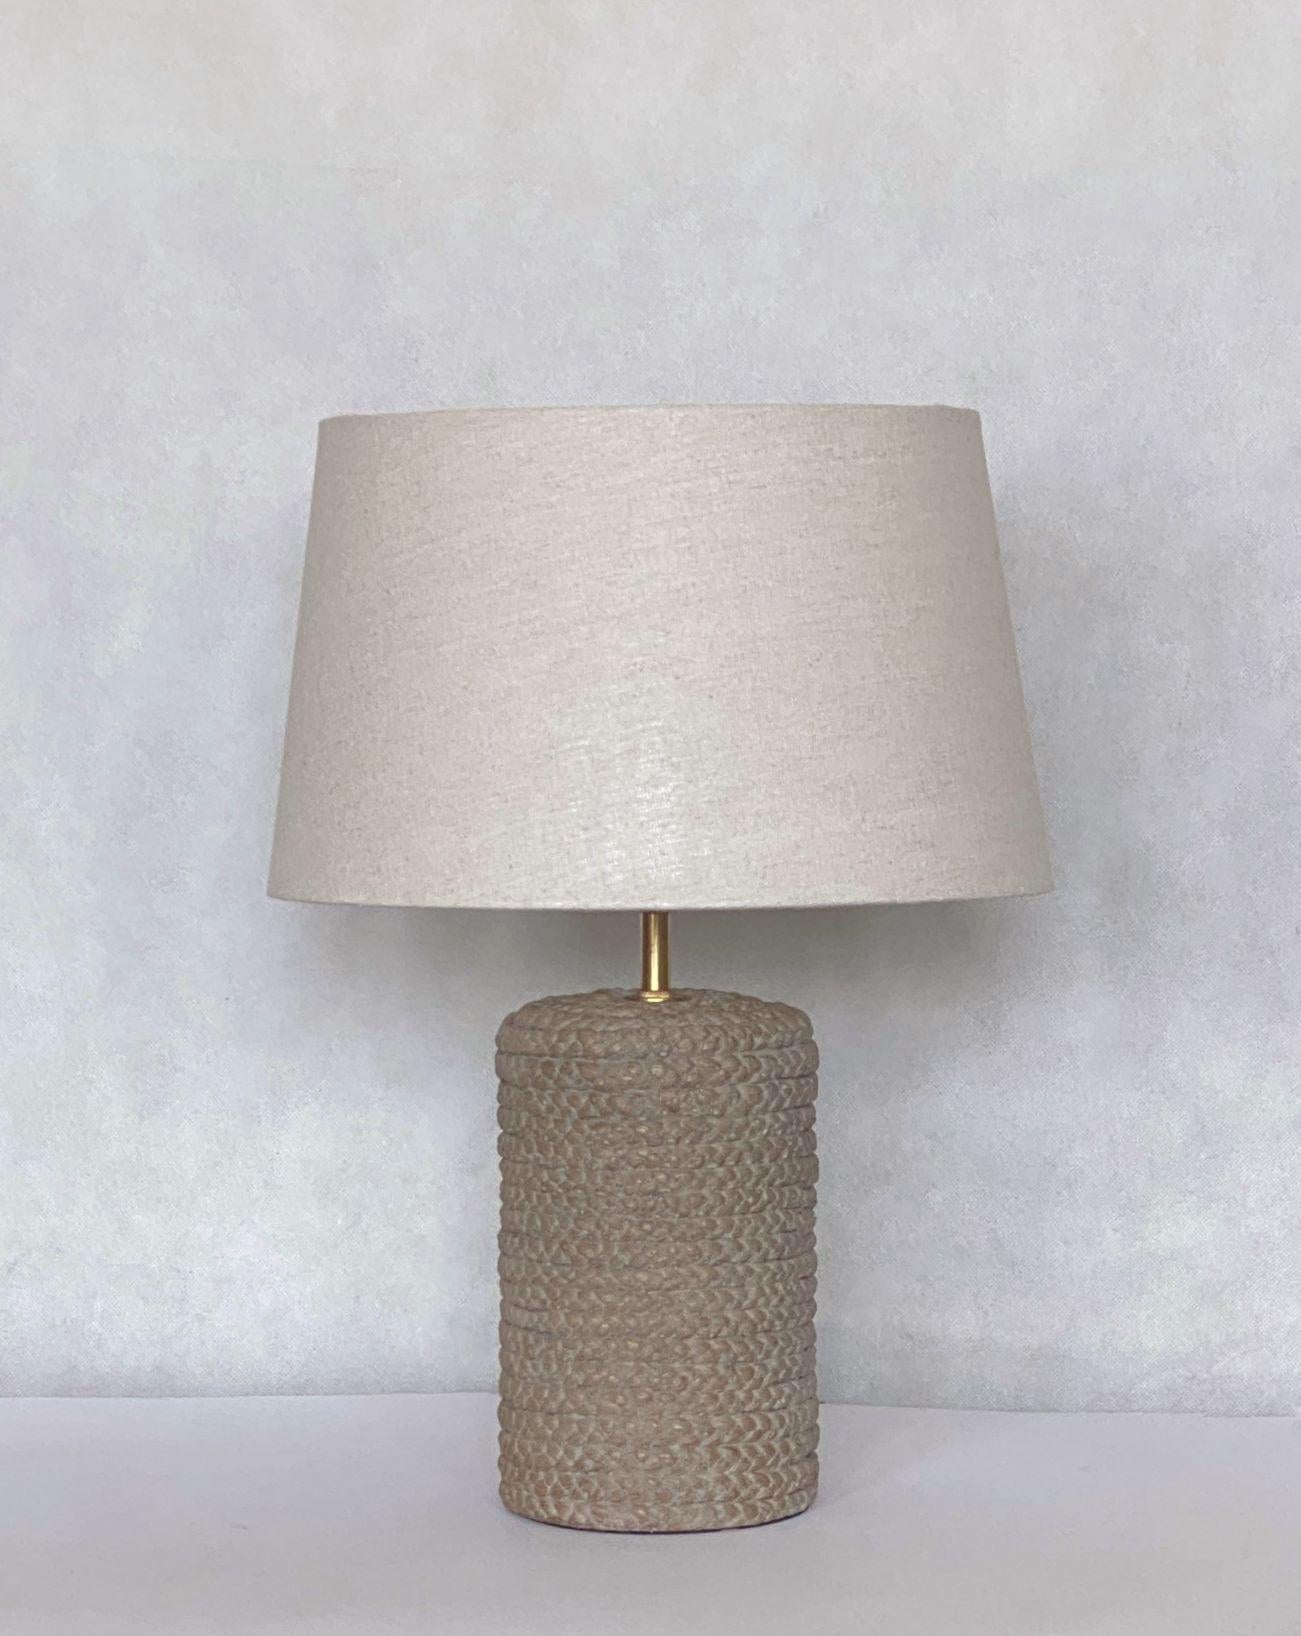 Mid-Century Modern Pair of Scandinavian Ceramic Table Lamps, 1960s, Linen Shades For Sale